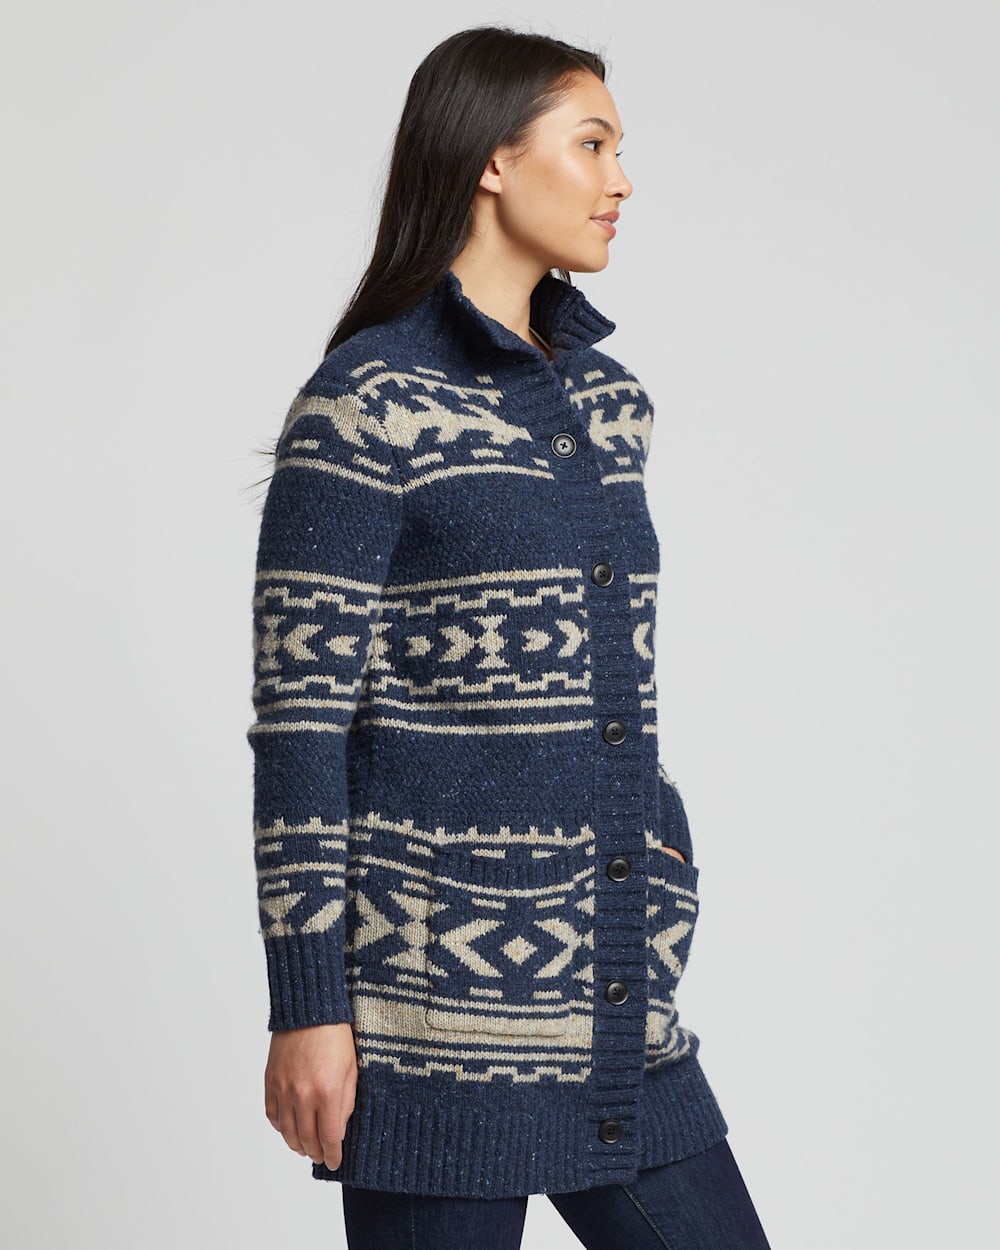 ALTERNATE VIEW OF WOMEN'S GRAPHIC DONEGAL MERINO CARDIGAN IN NAVY/OATMEAL image number 3